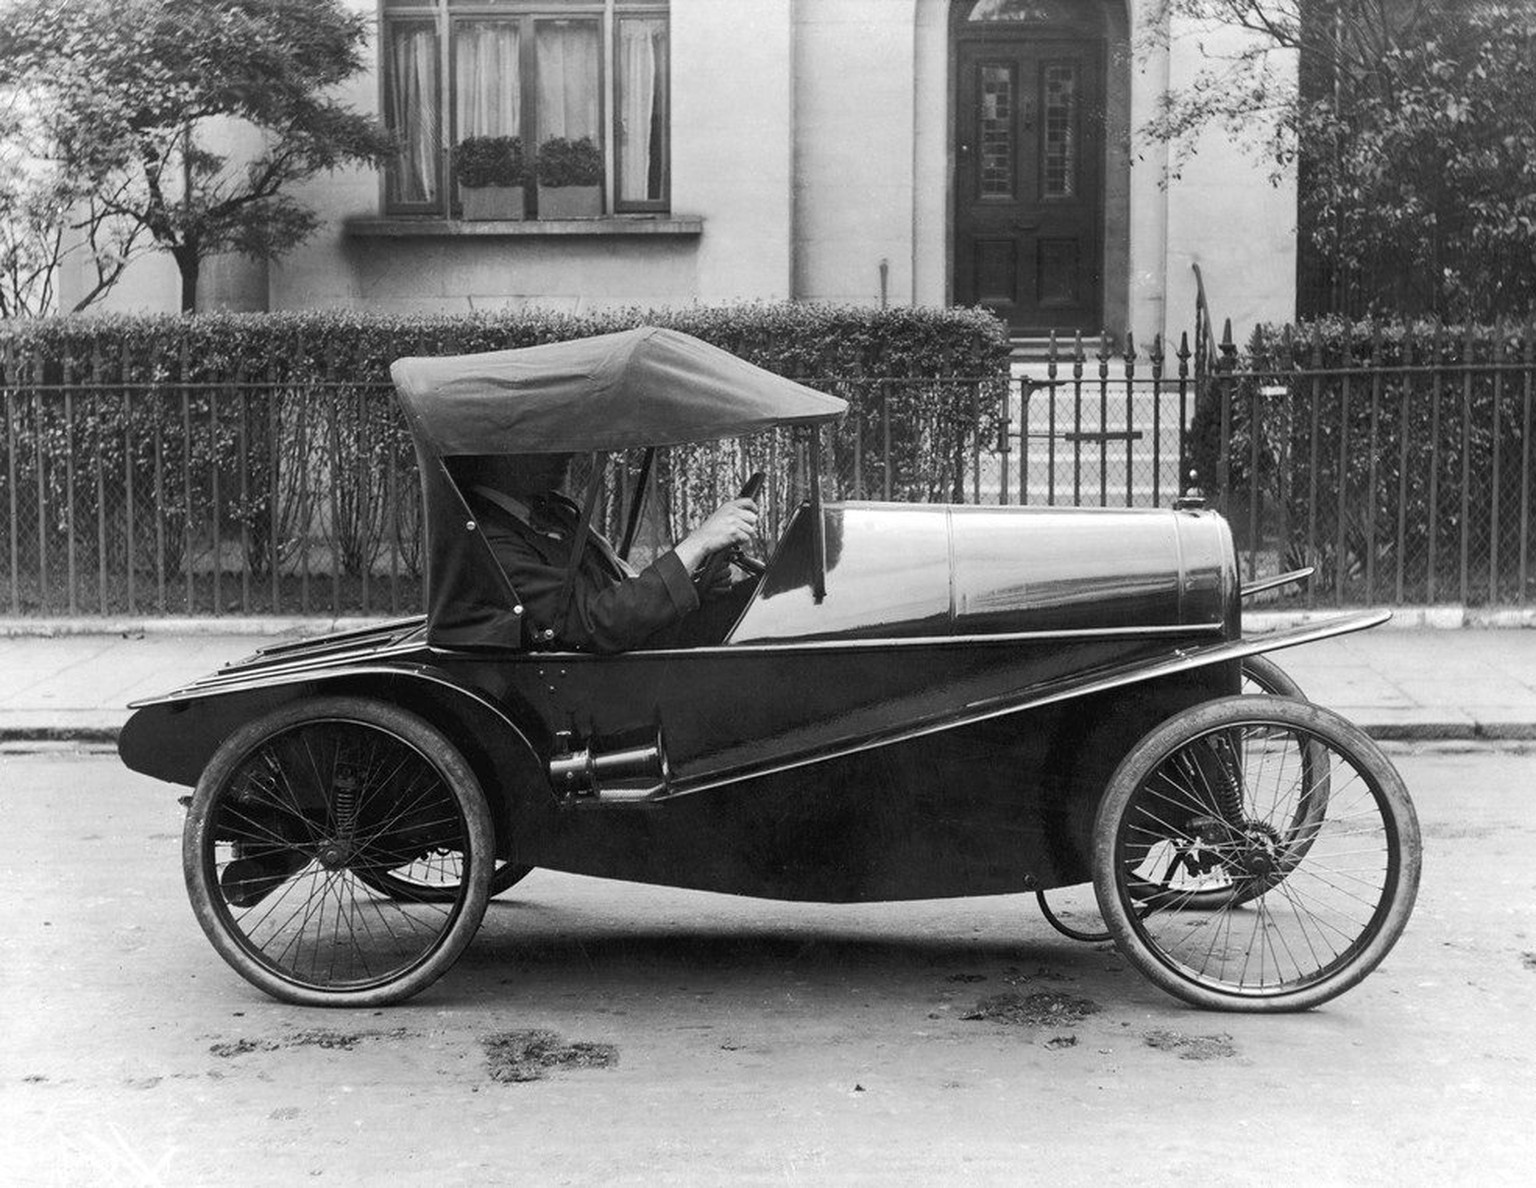 A Carden single transport vehicle (cyclecar) in the UK in 1916.
https://m.yandex.ru/collections/card/58205ac248af7d66583076bd/